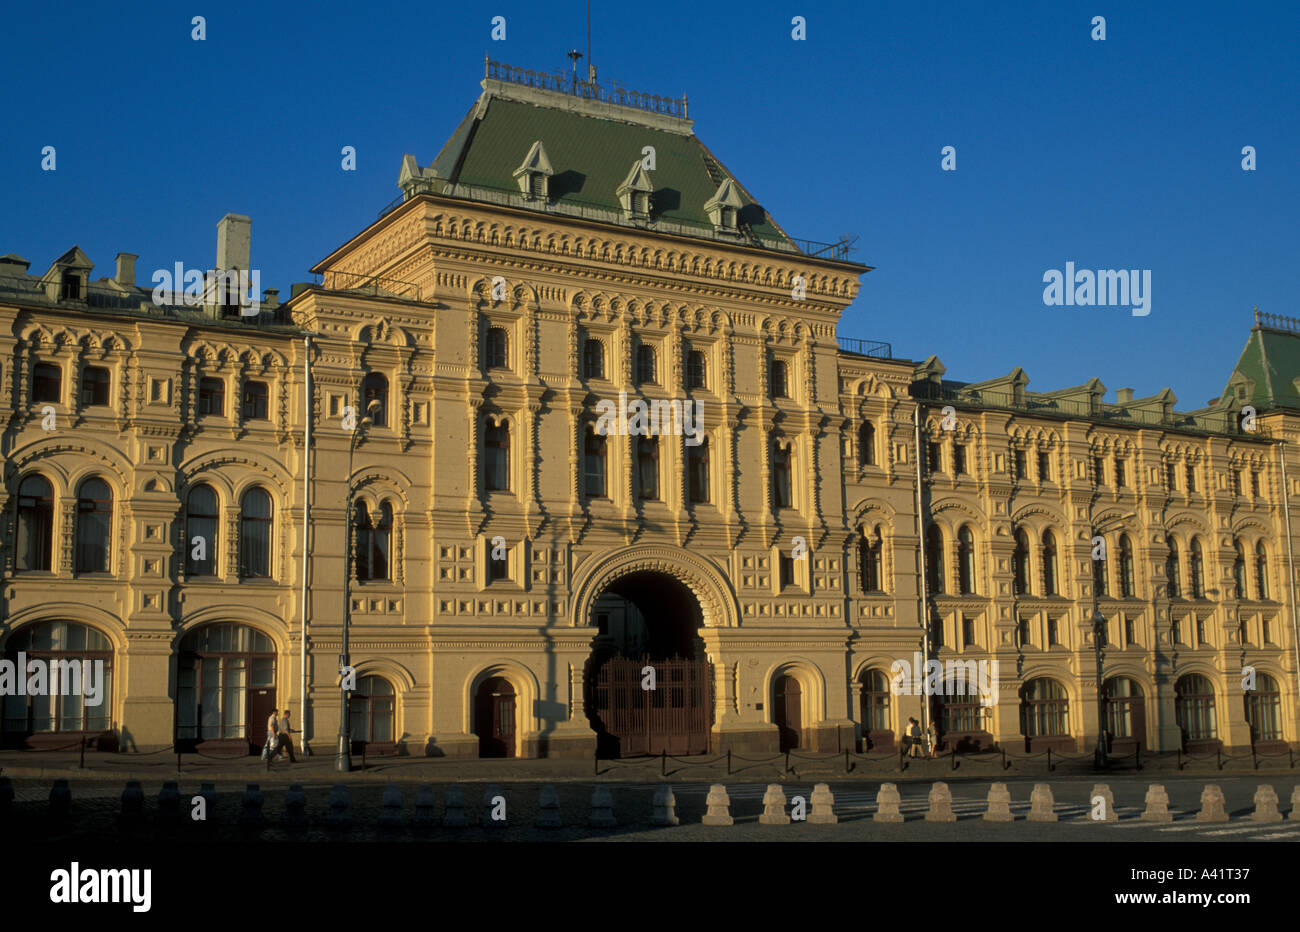 Old Stock Exchange Building On Red Square In Moscow Russia Stock Photo Alamy